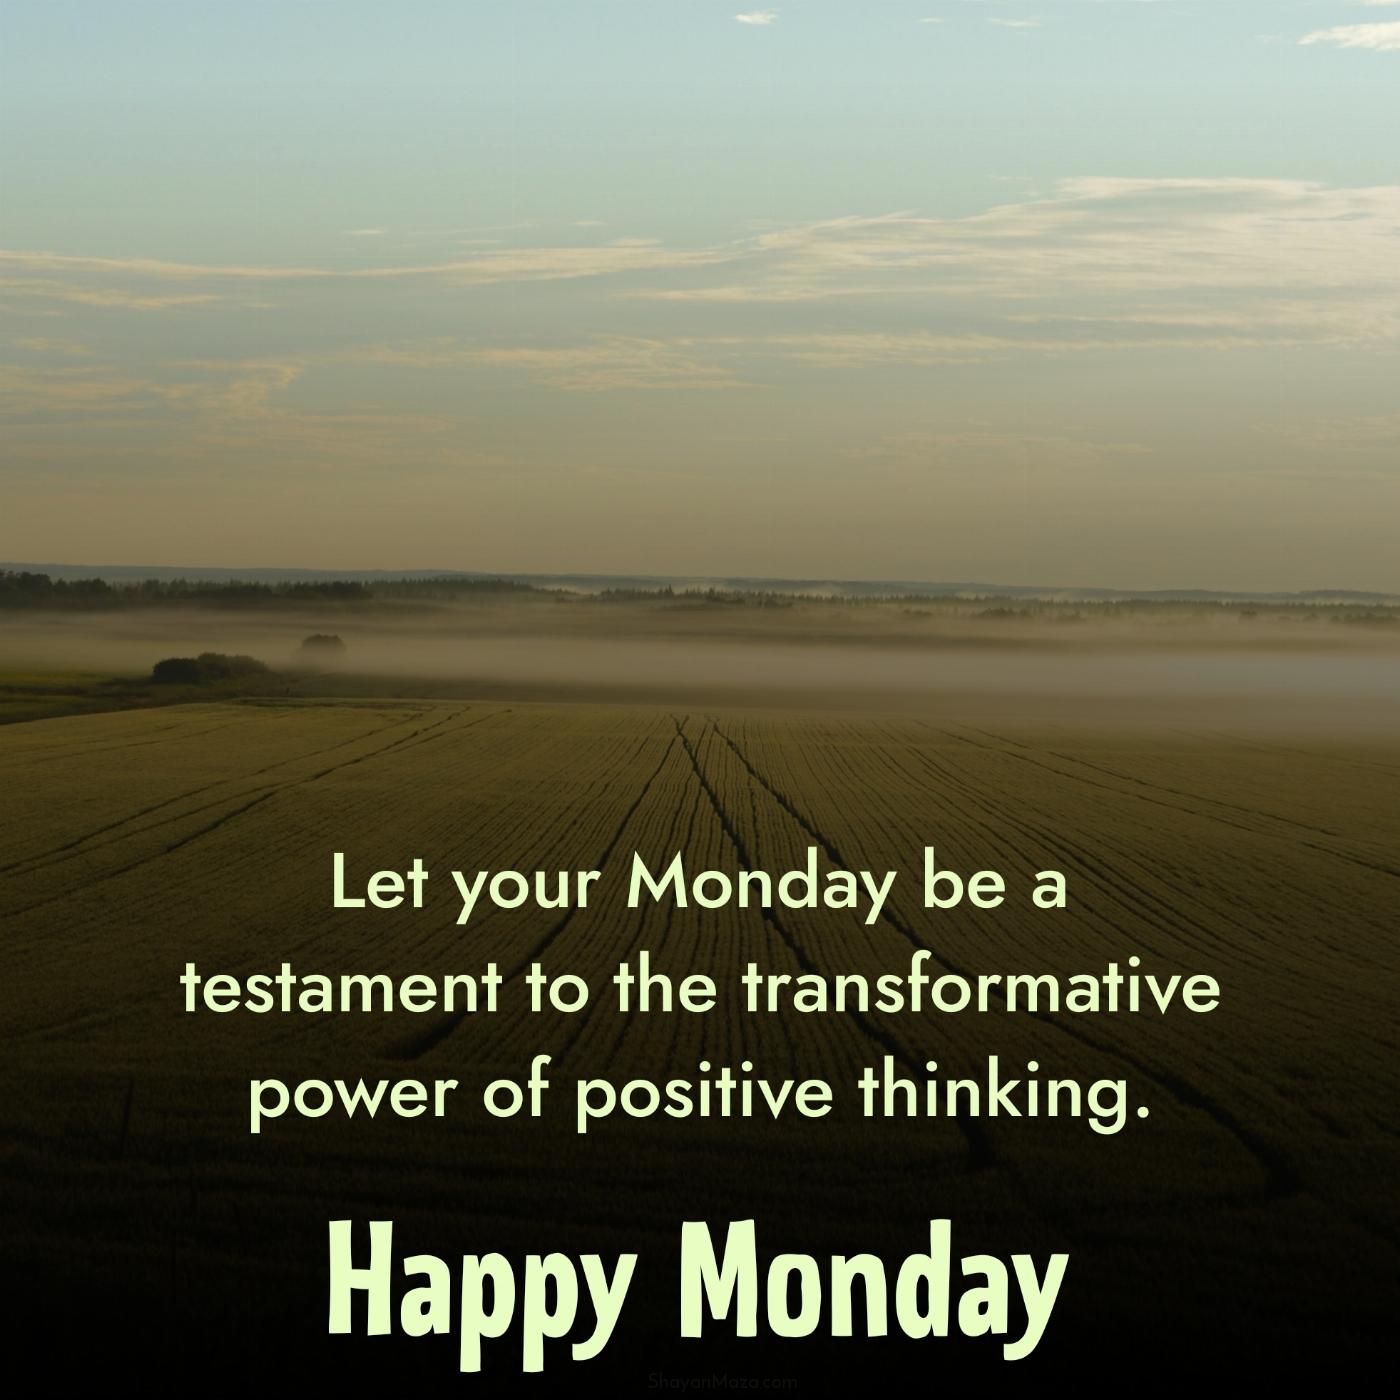 Let your Monday be a testament to the transformative power